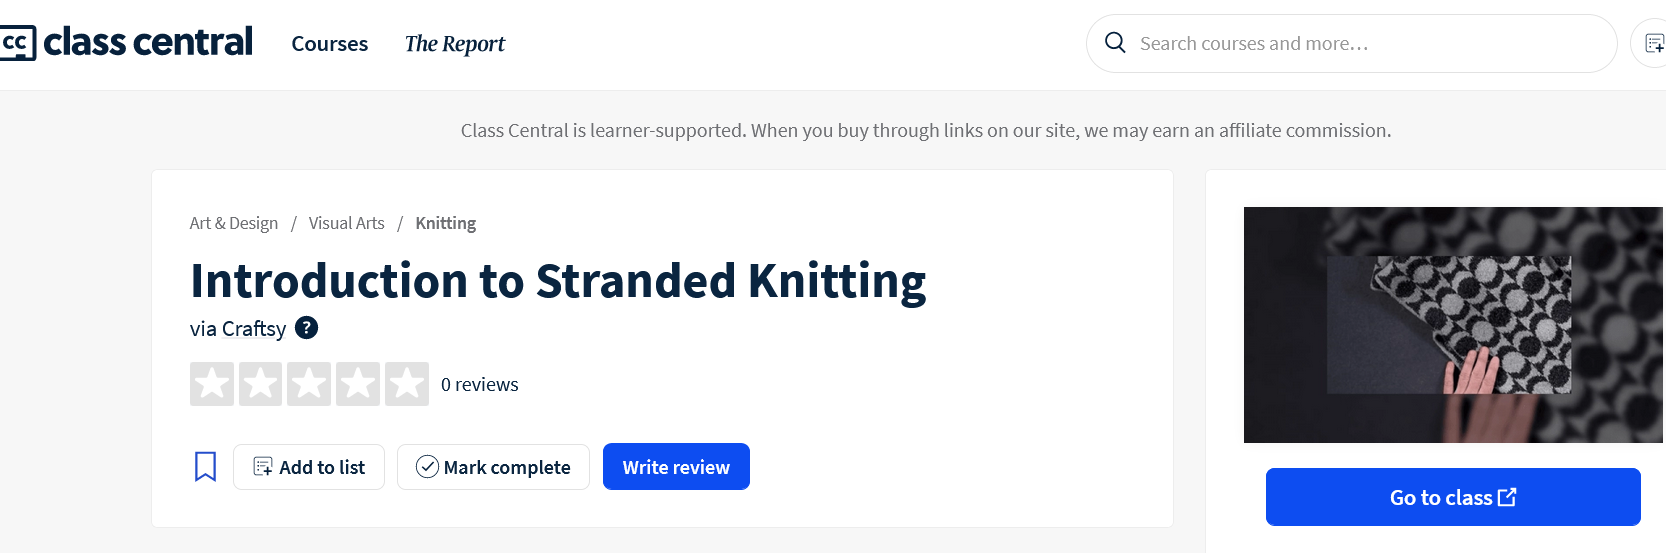 Introduction to Stranded Knitting